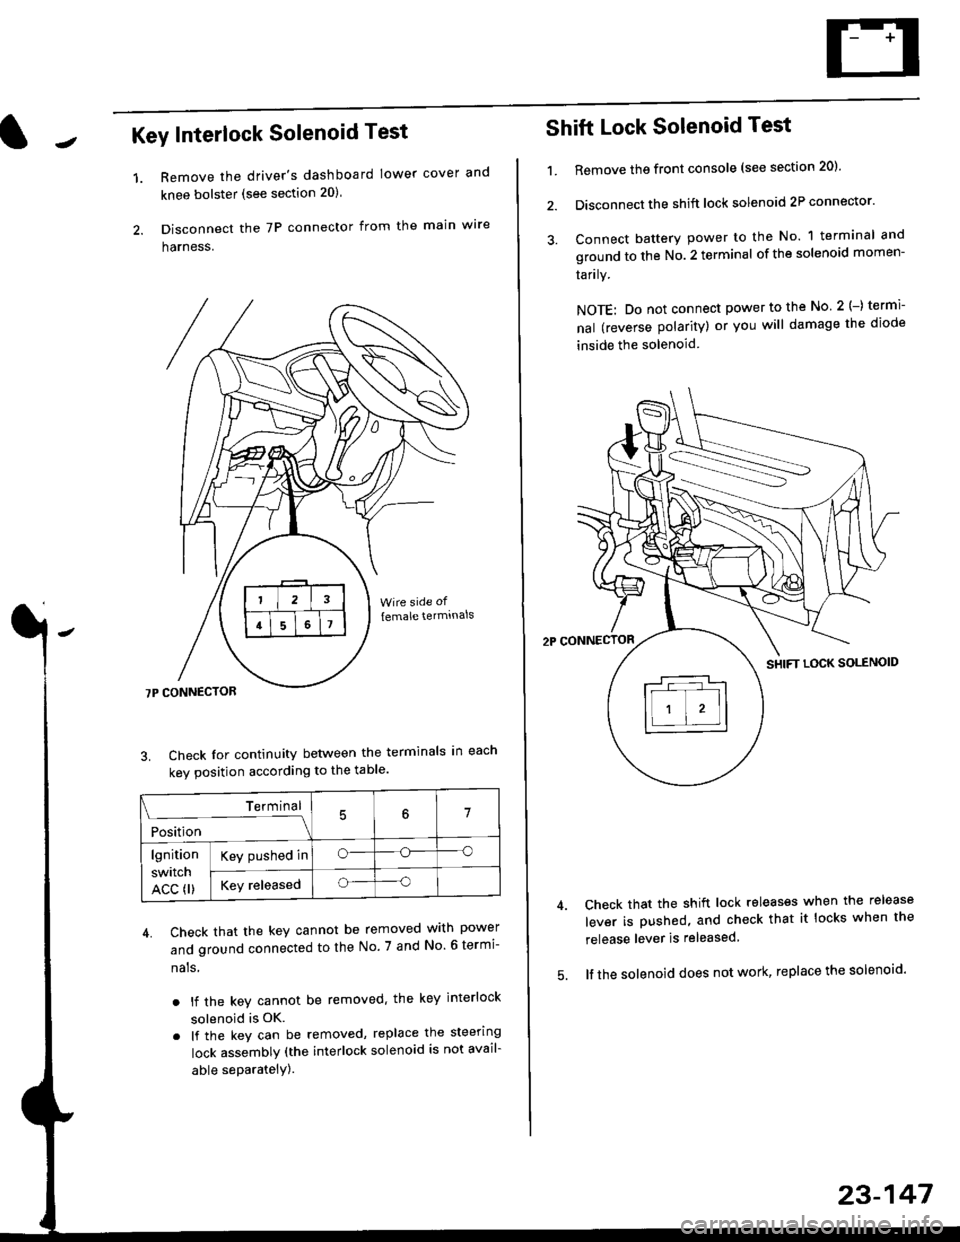 HONDA CIVIC 1998 6.G Workshop Manual Key Interlock Solenoid Test
Remove the drivers dashboard lower cover and
knee bolster (see section 20)
Disconnect the 7P connector from the main wre
harness.
3. Check Ior continuity between the term